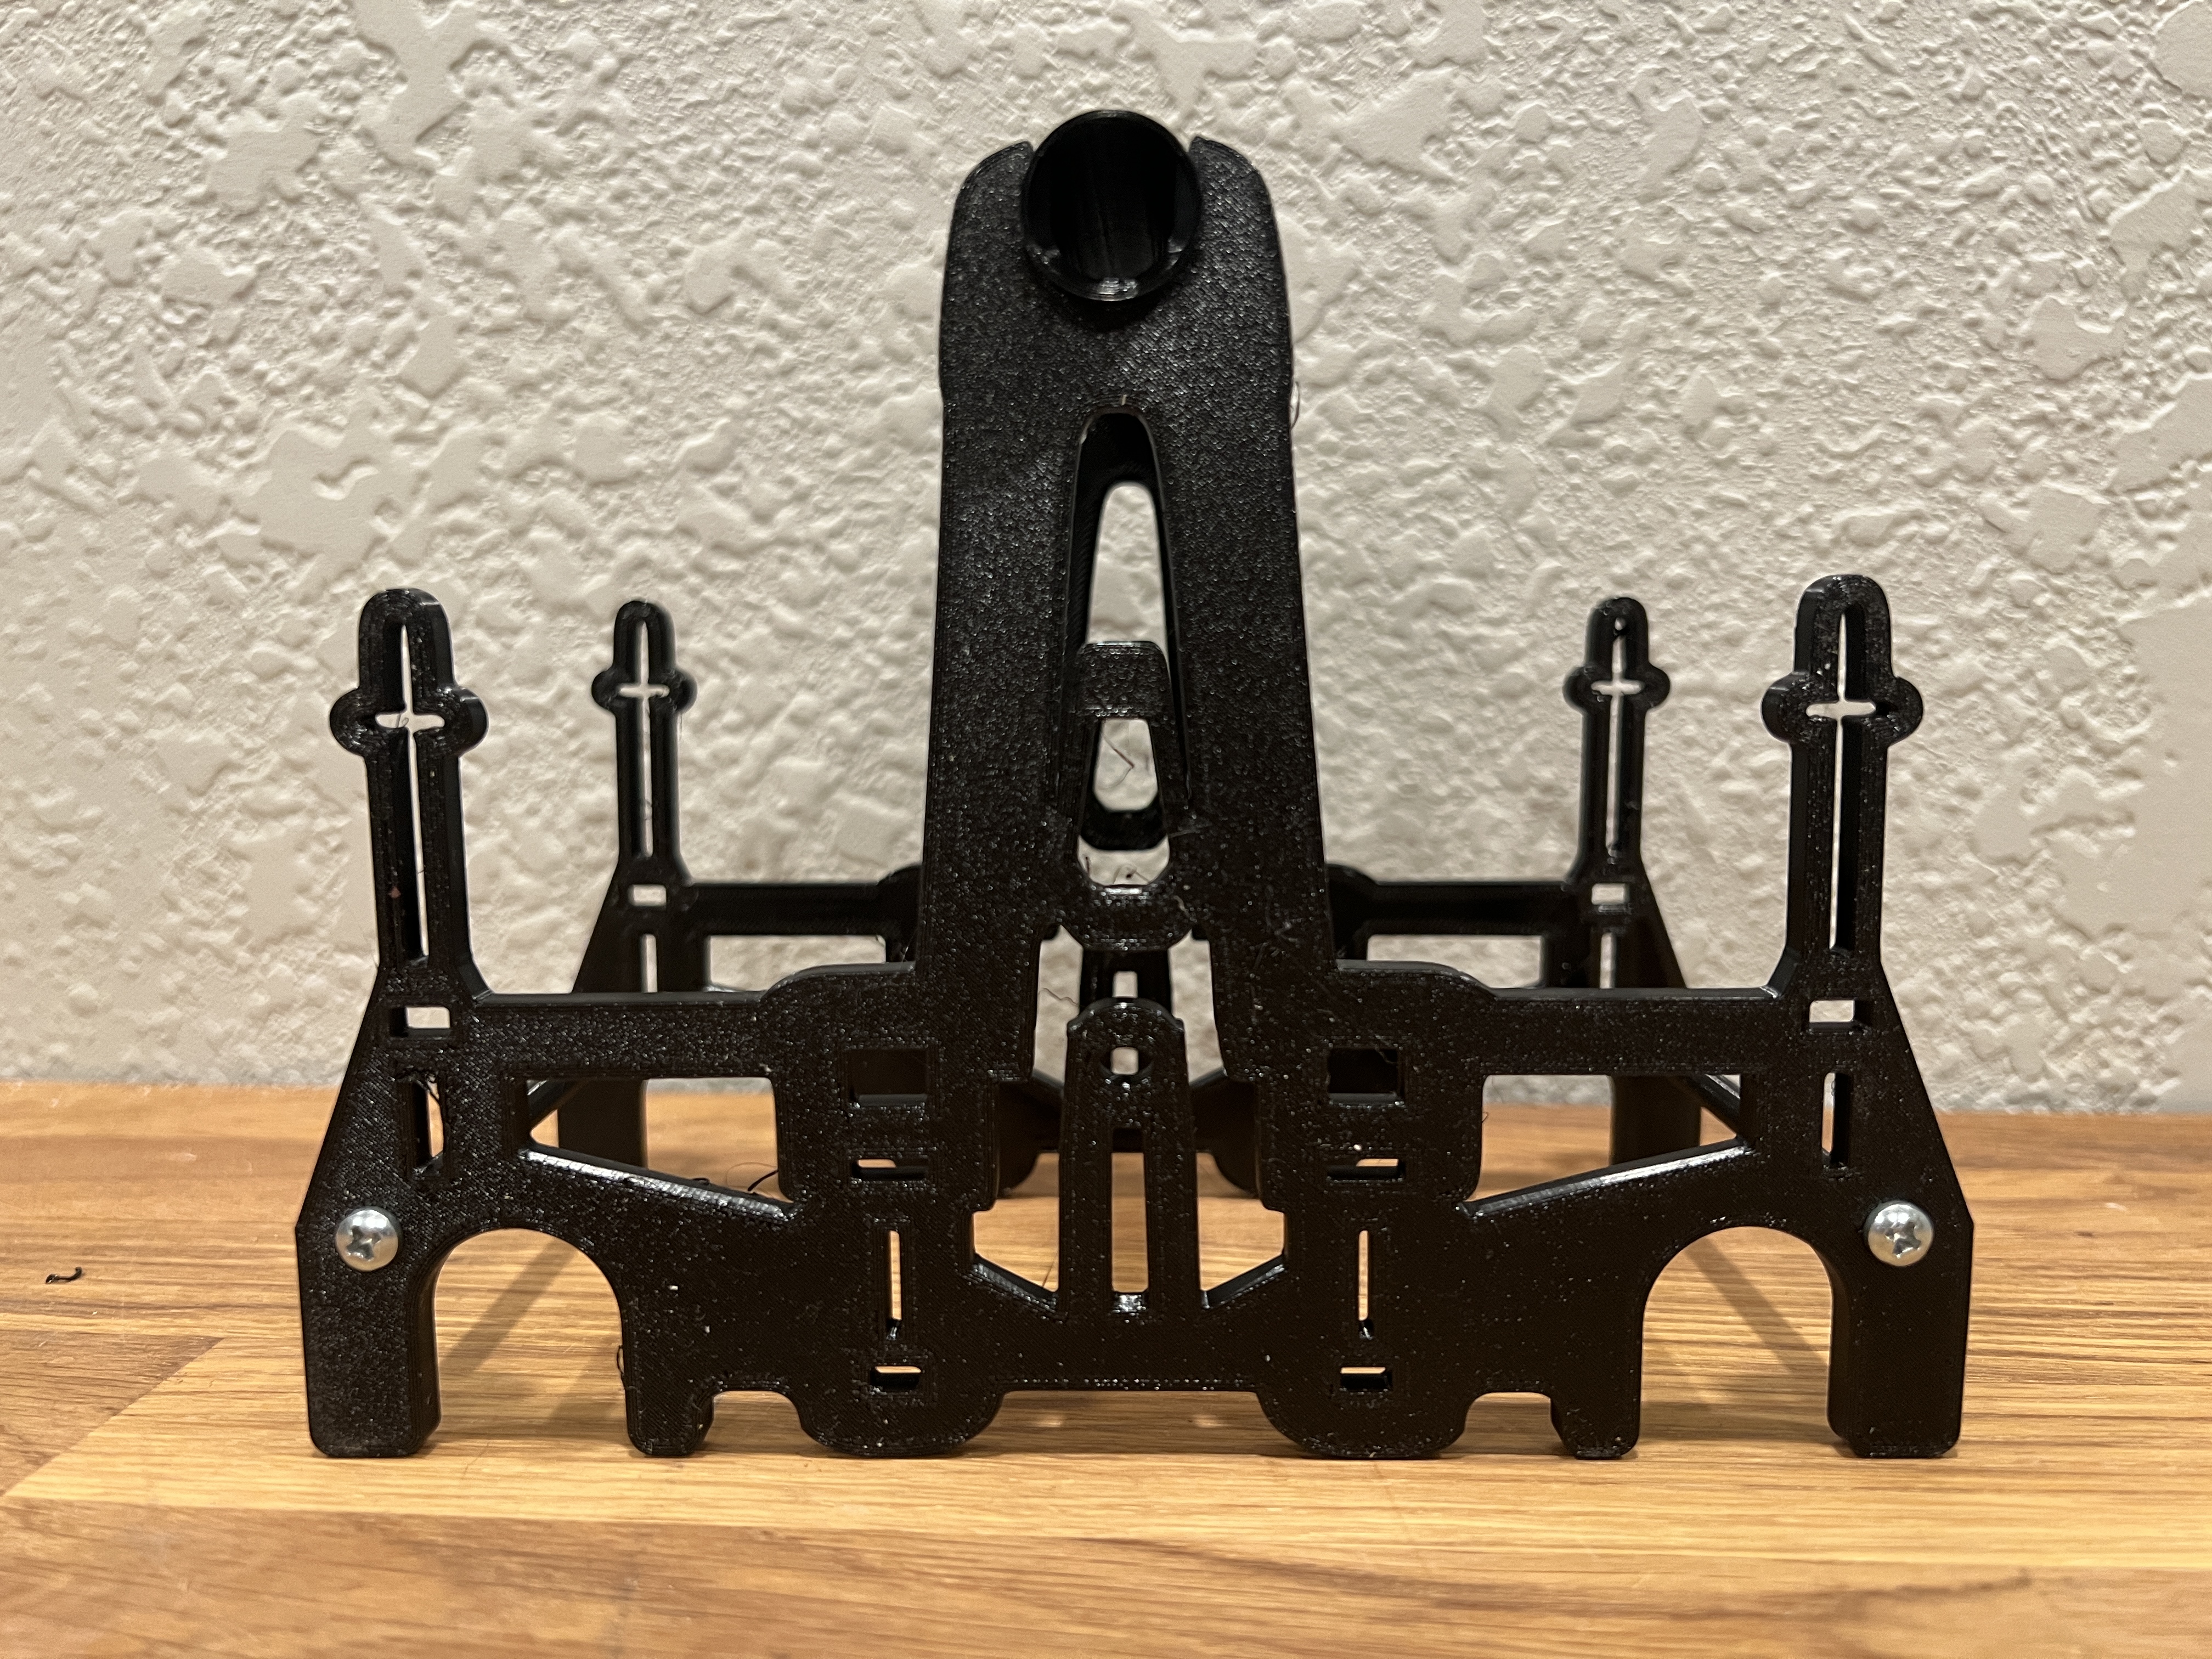 X-Wing RackStand for RepBox, RepWinder, RepRack, and as a standalone spool holder.